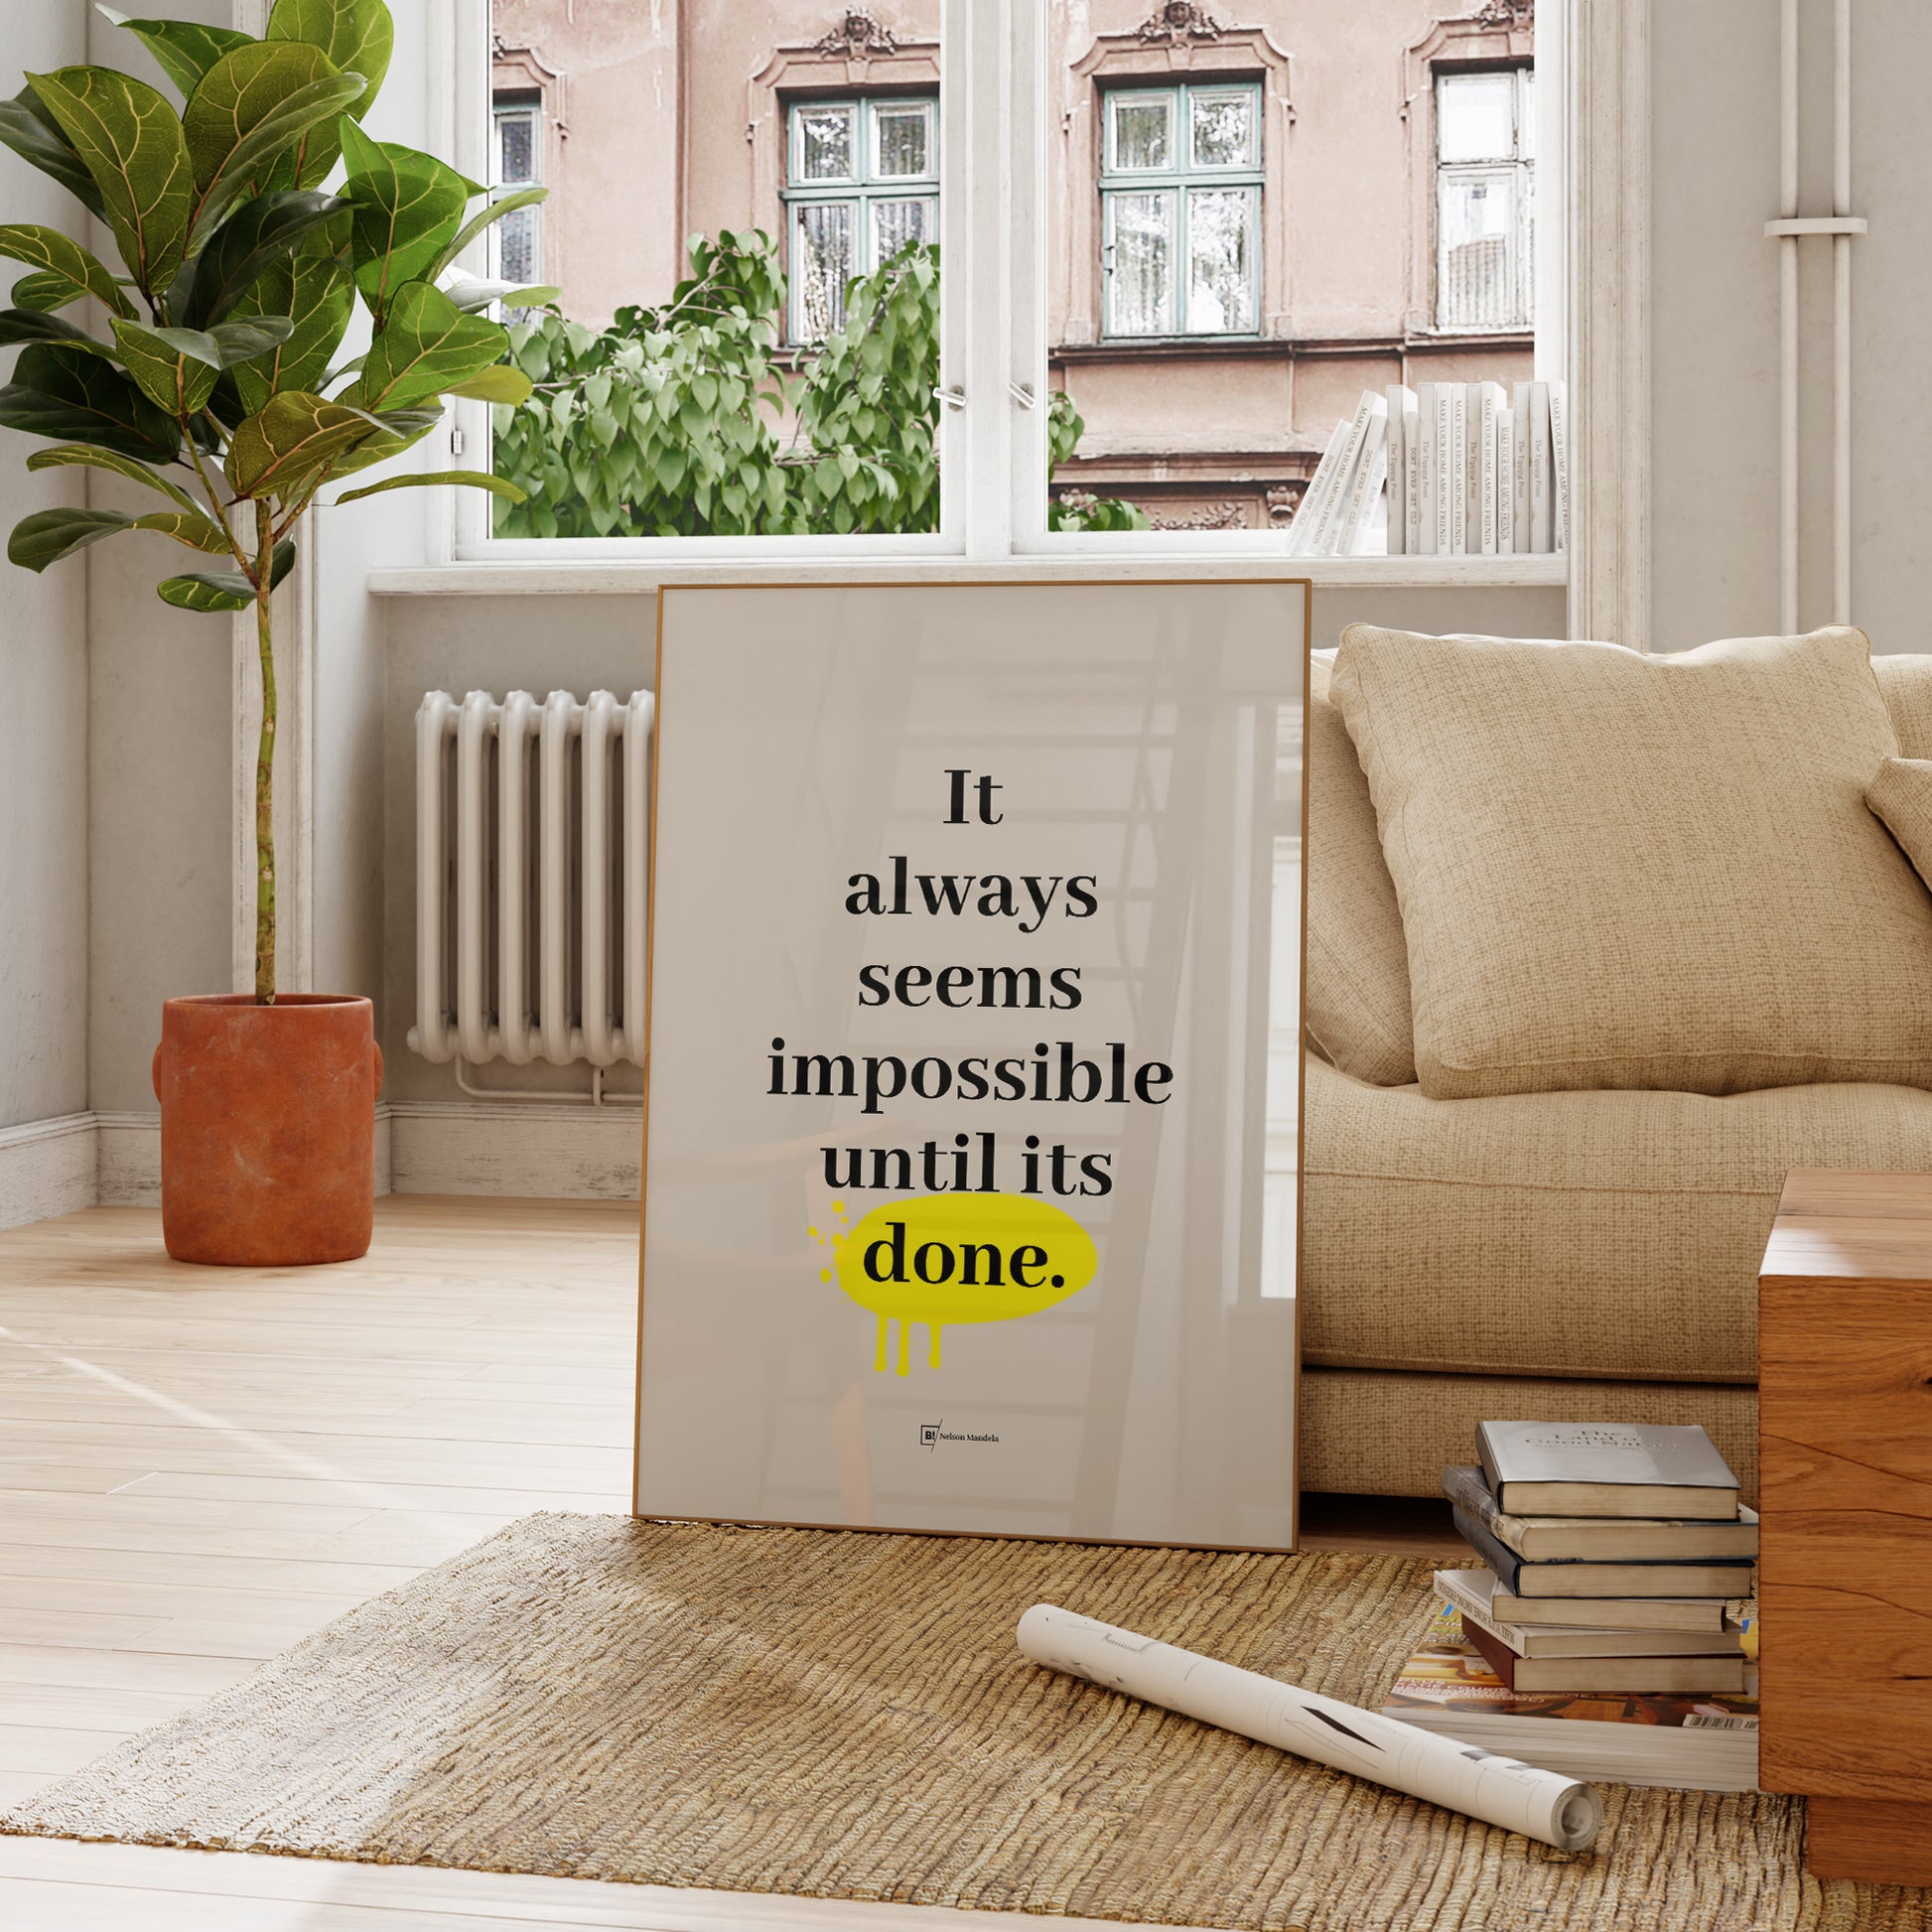 Be inspired by Nelson Mandela's famous "It always seems impossible until its done" quote art print. This artwork was printed using the giclée process on archival acid-free paper and is presented in a french living room that captures its timeless beauty in every detail.